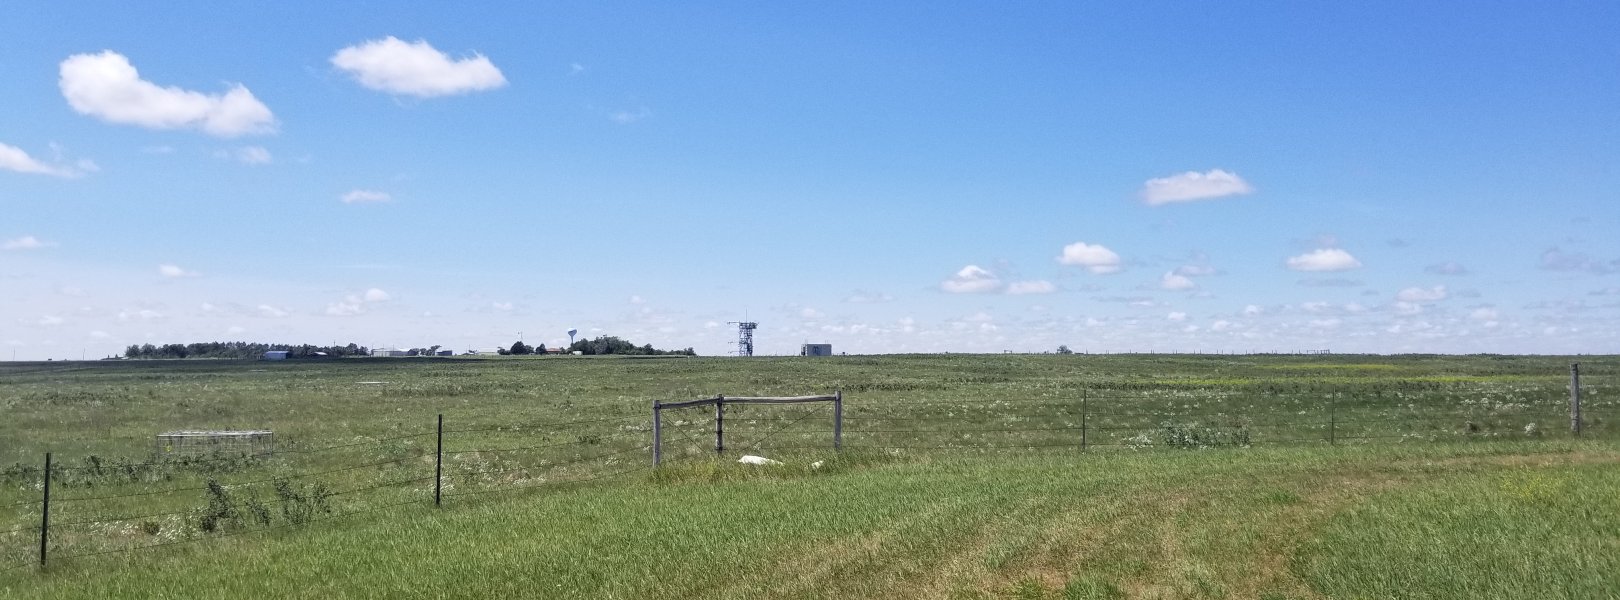 Northern Great Plains Research Laboratory (NOGP) field site at North Dakota 